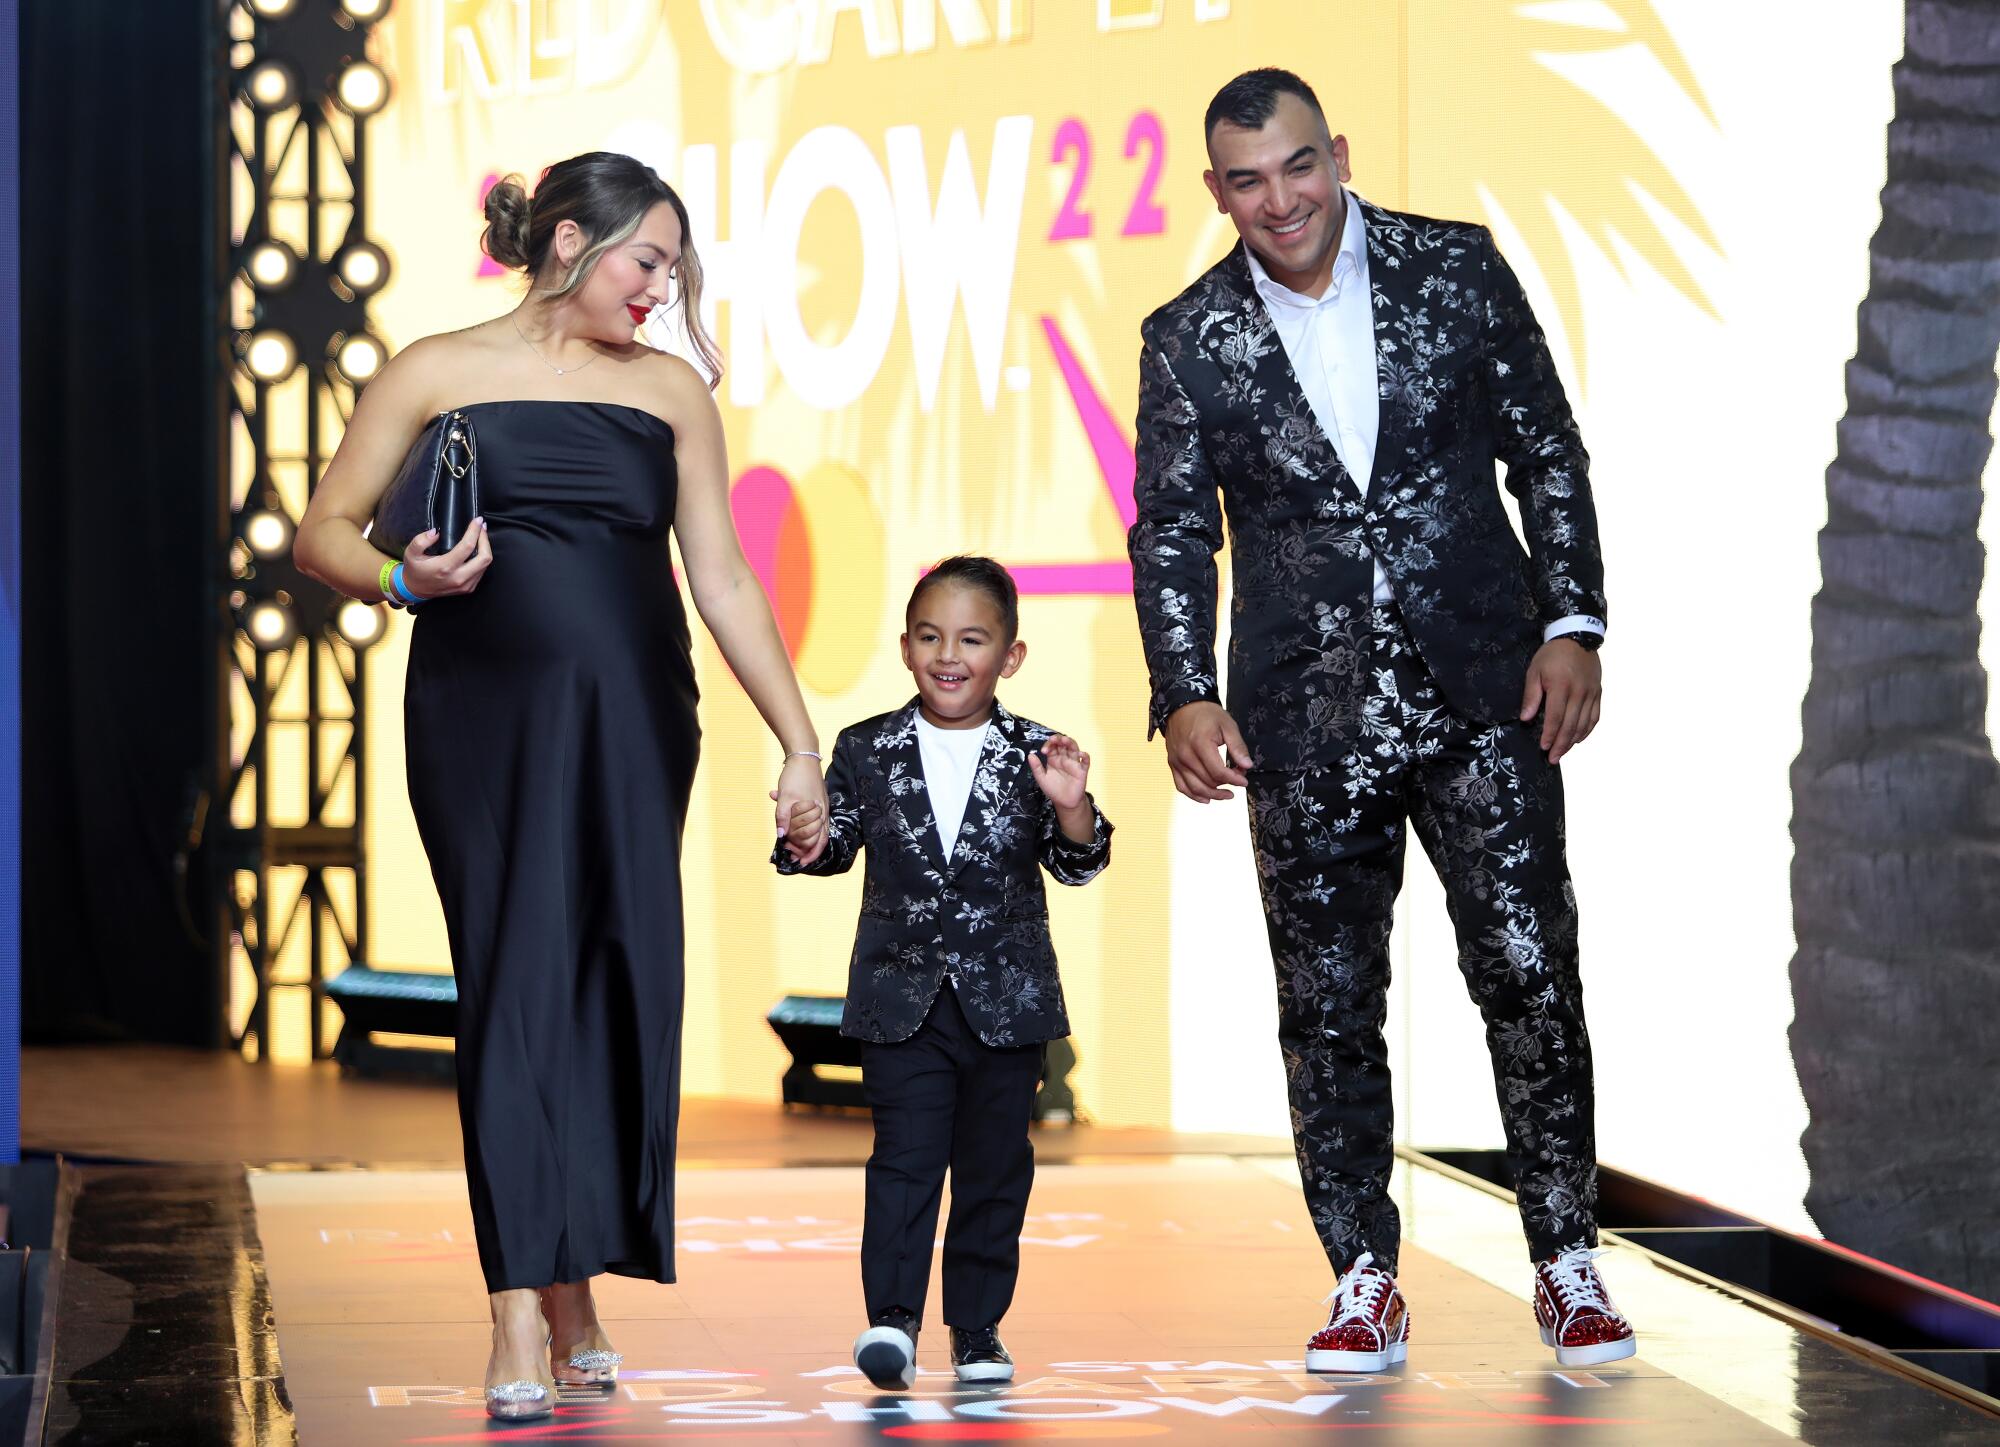 Jose Trevino in a black suit with silver designs and family arrive at the 2022 MLB All-Star Game Red Carpet Show.